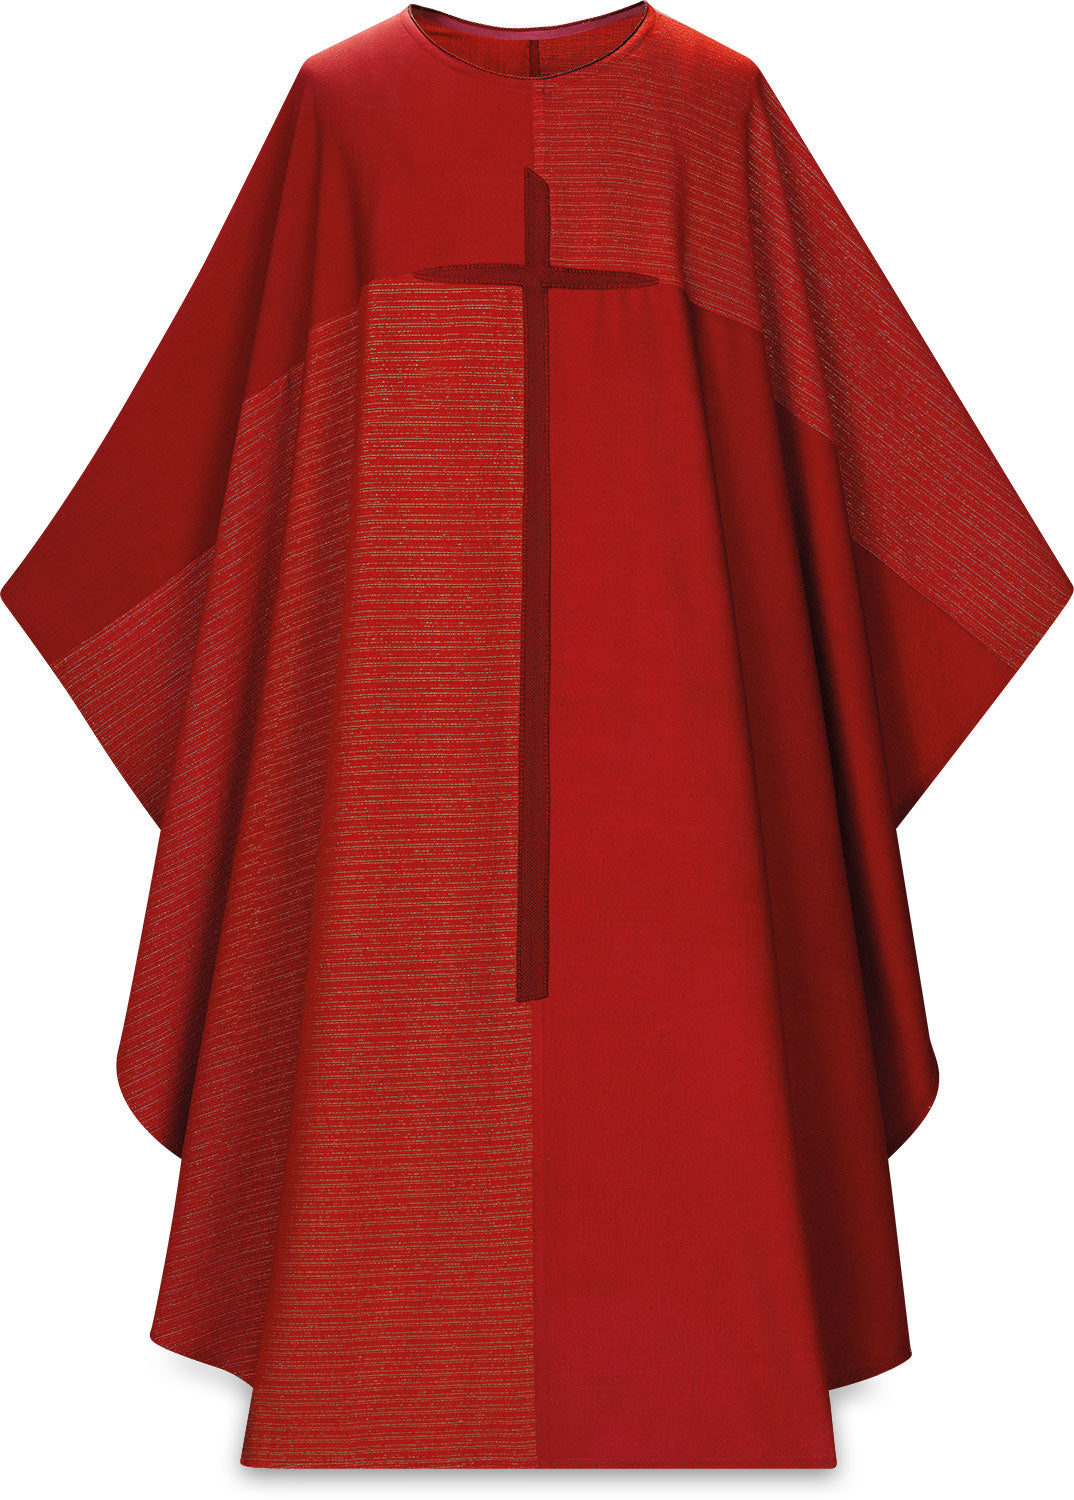 chasuble-red-5161.jpg